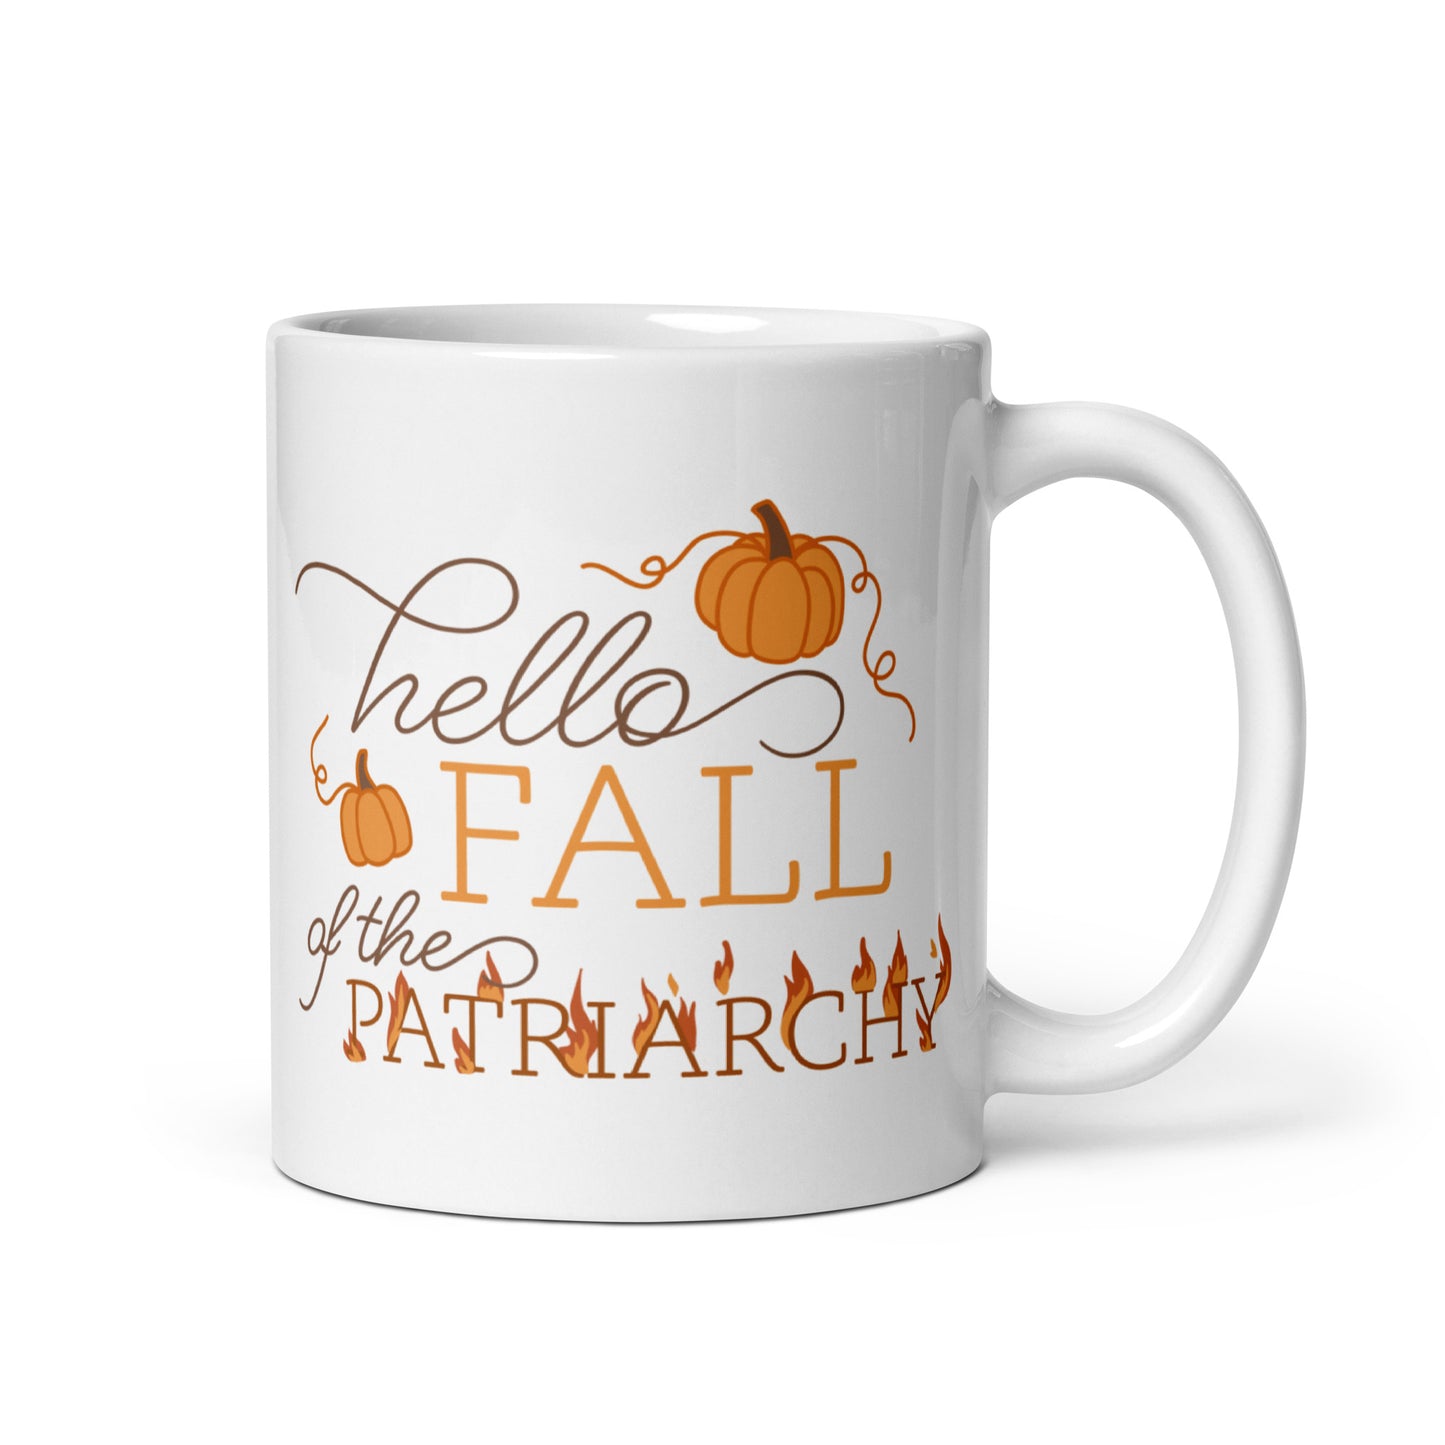 A white ceramic coffee mug featuring text in a blend of cursive and serif fonts that read "hello FALL of the PATRIARCHY". Pumpkins surround the upper half of the text, and the word "Patriarchy" is surrounded by flames.